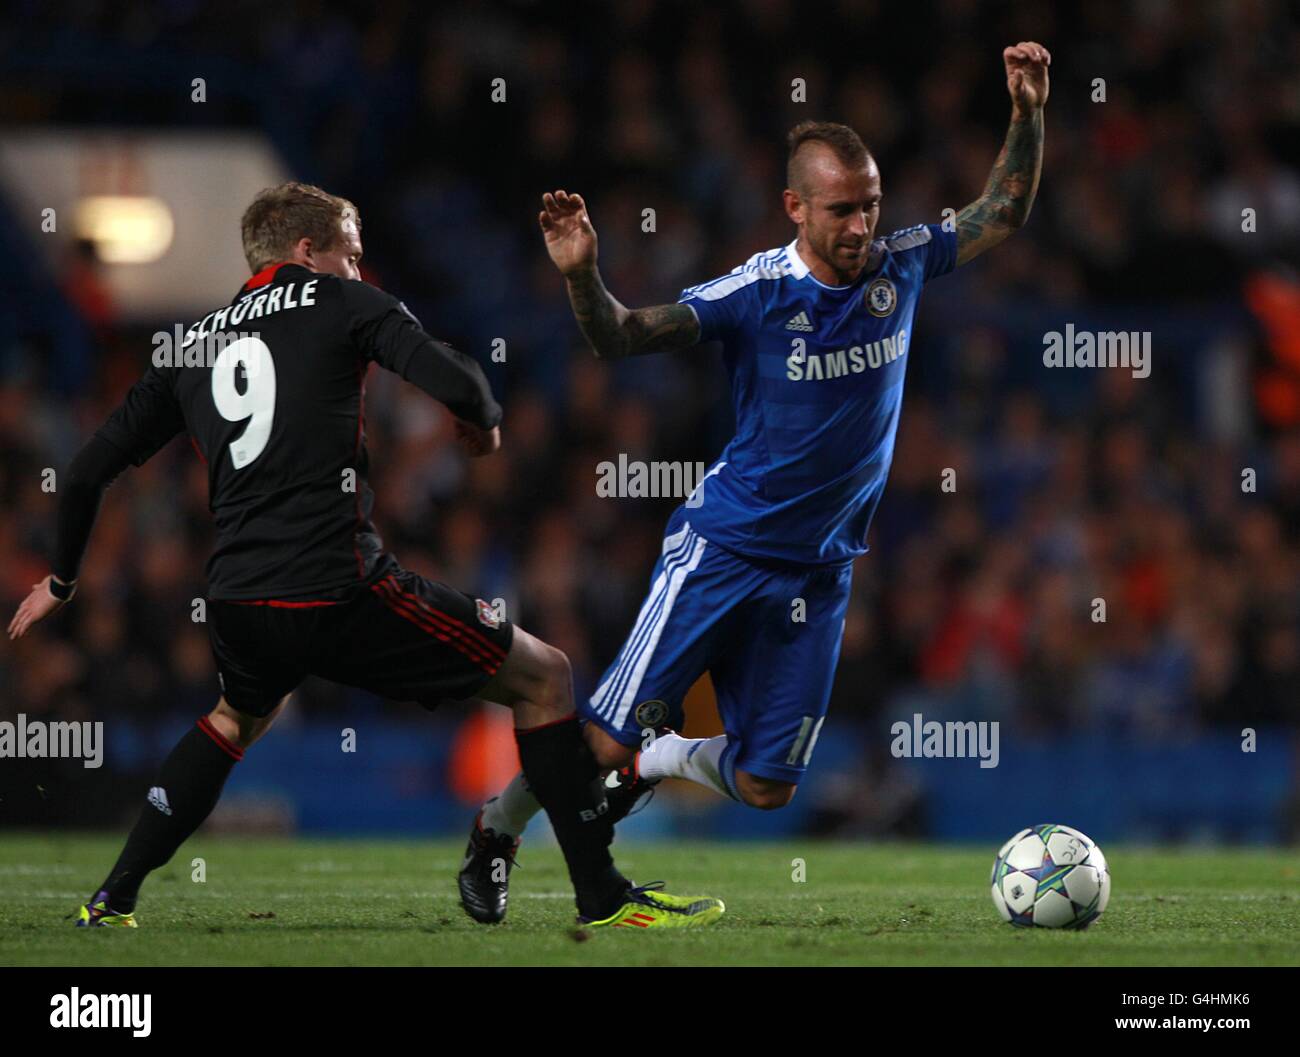 Chelsea's Raul Meireles is brought down by Bayer Leverkusen's Andre Schurrle Stock Photo